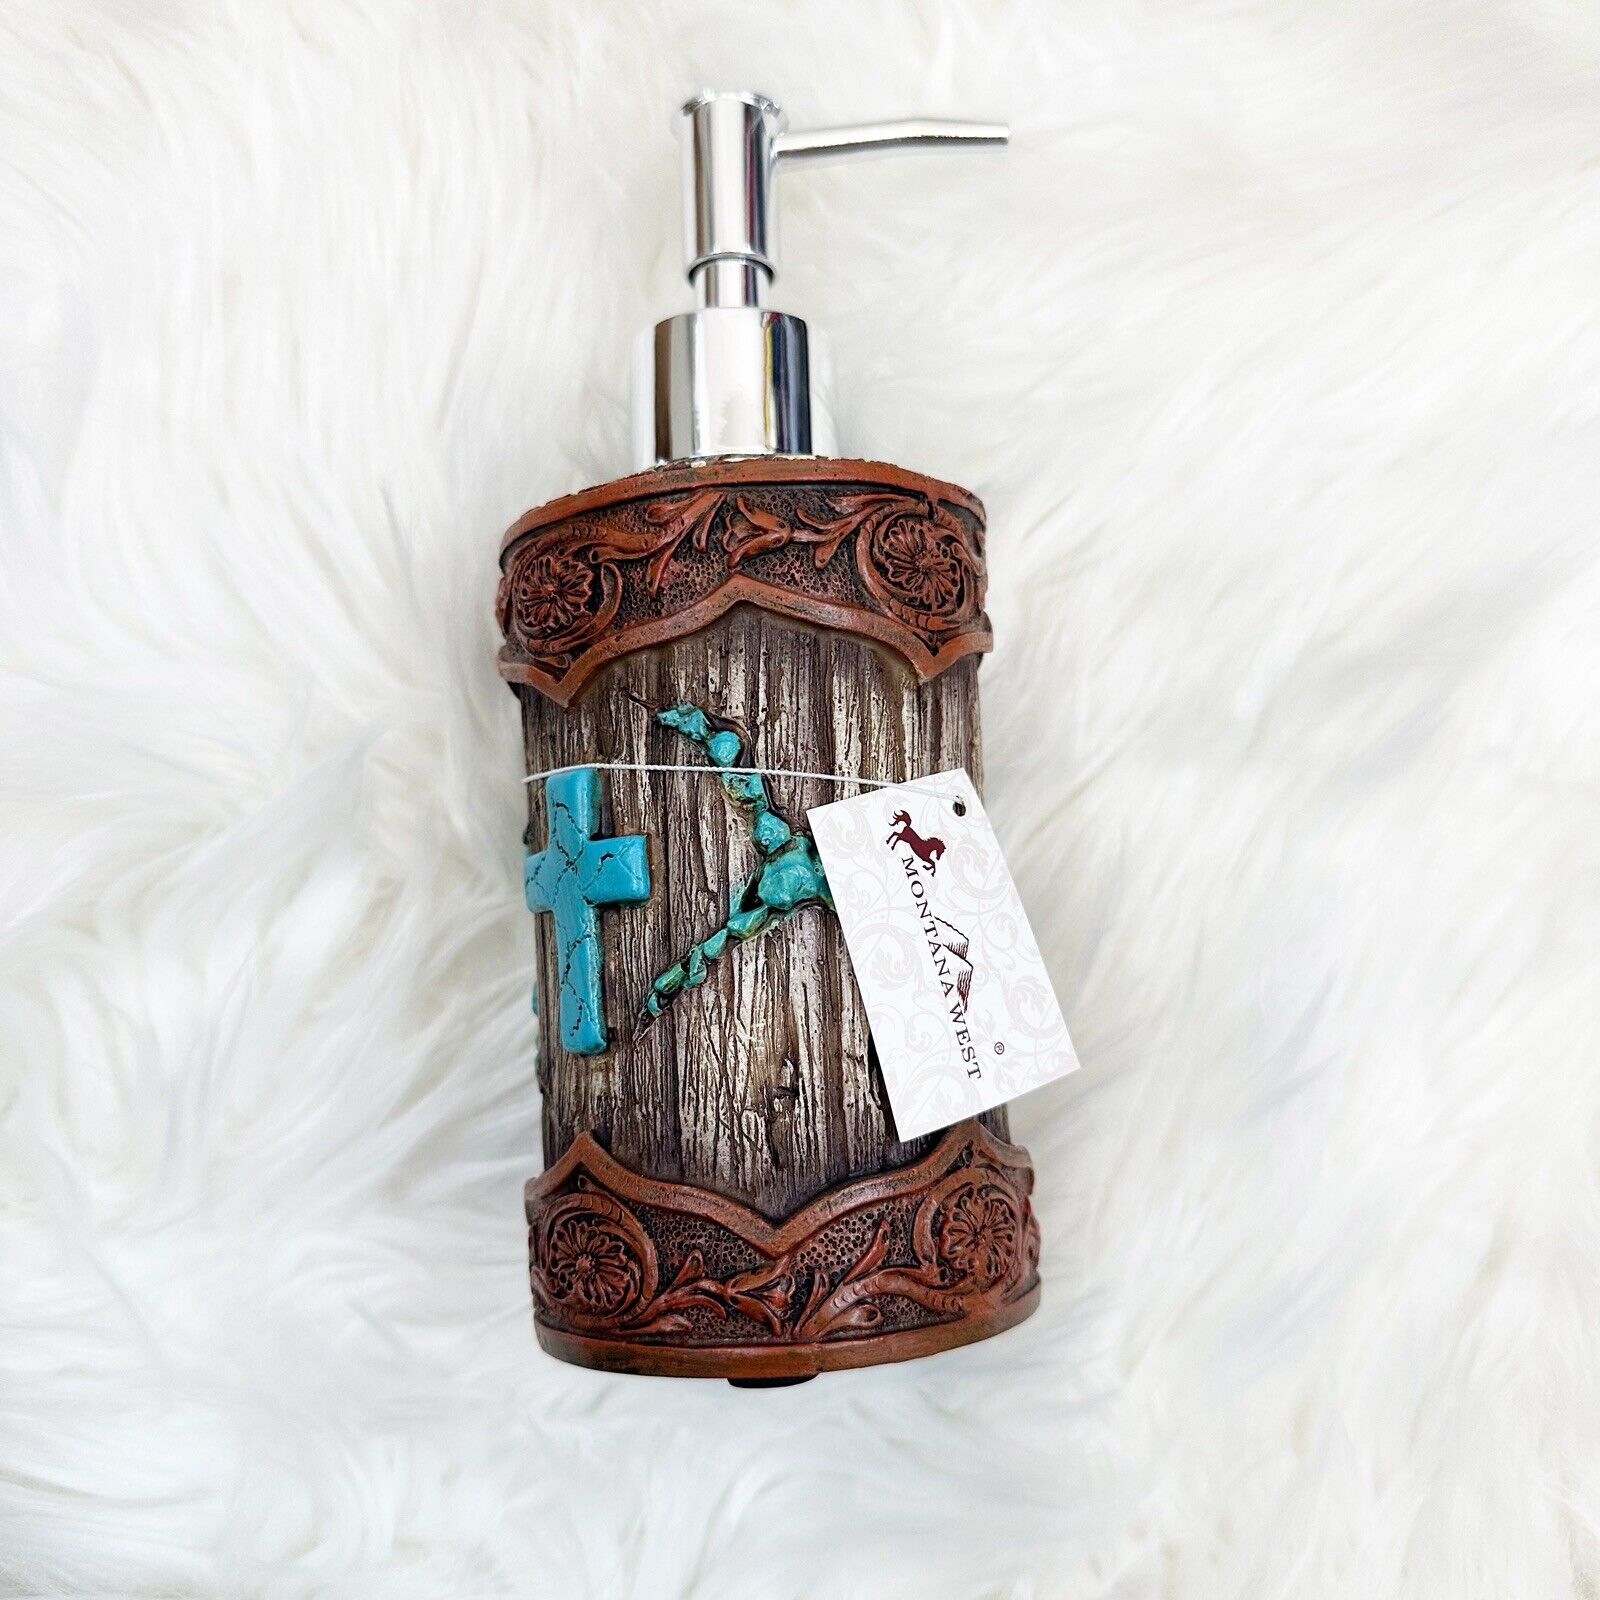 Montana West Wood Like Tooled Leather Resin Bunkhouse Soap Lotion Pump Dispenser